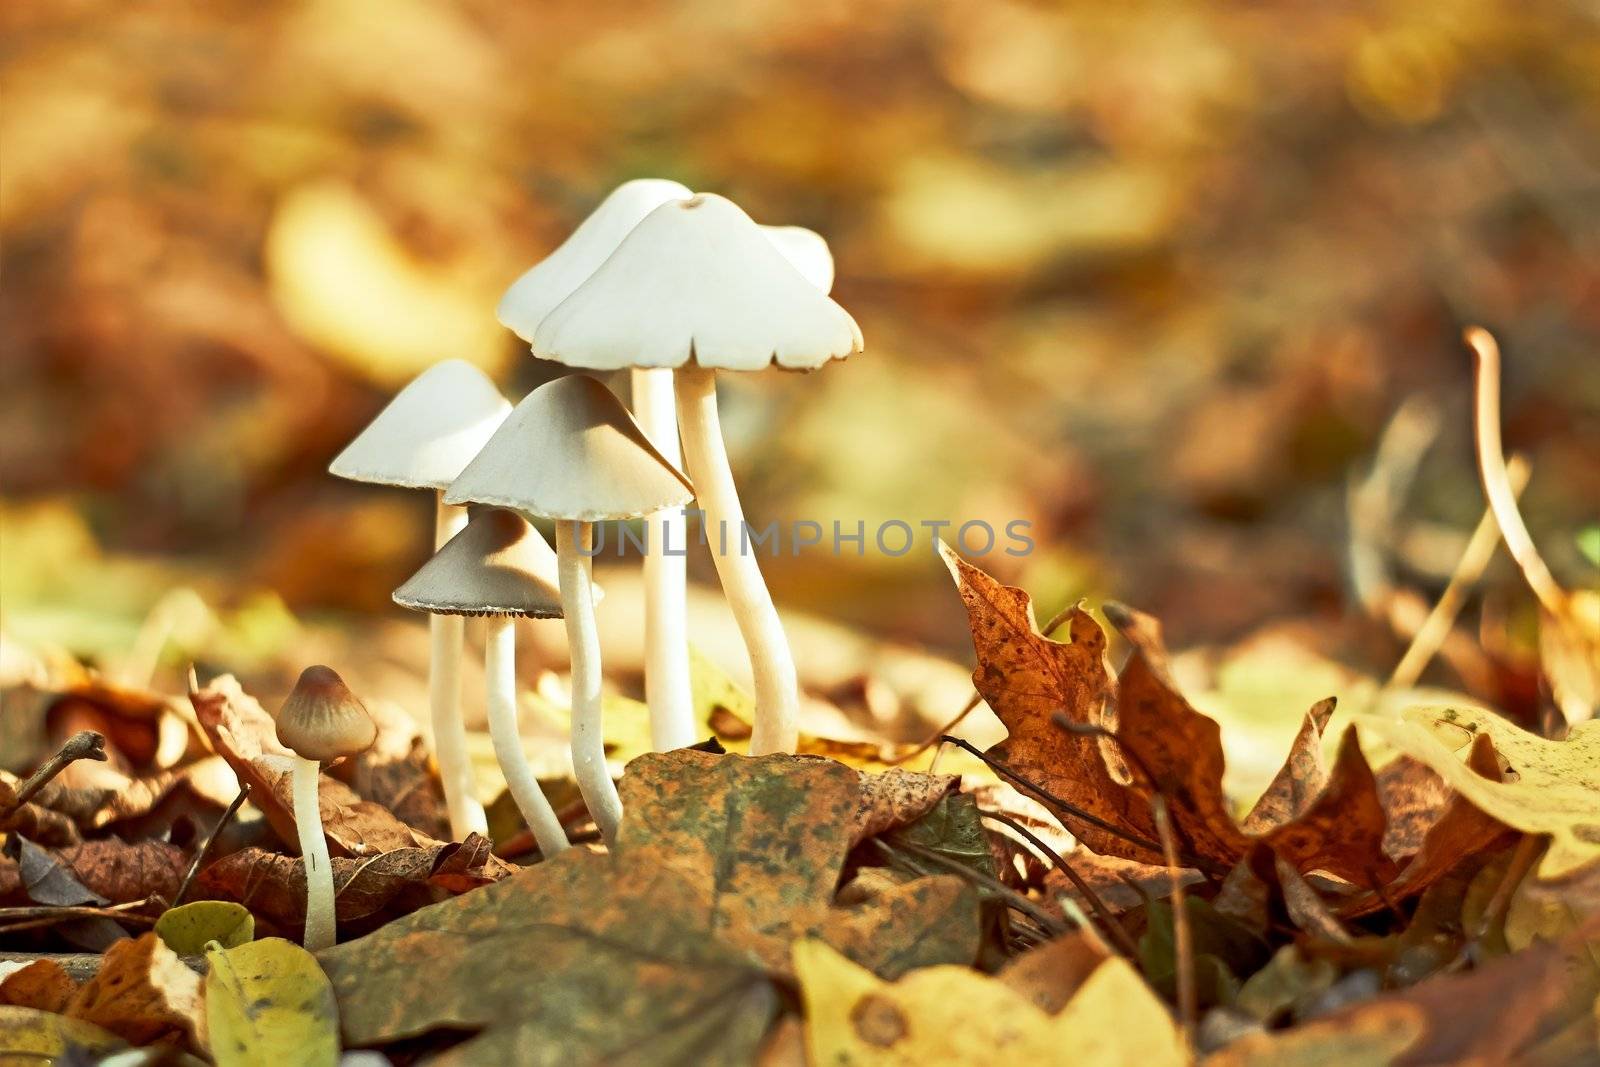 Group of small white mushrooms in the autumn forest among fallen leaves